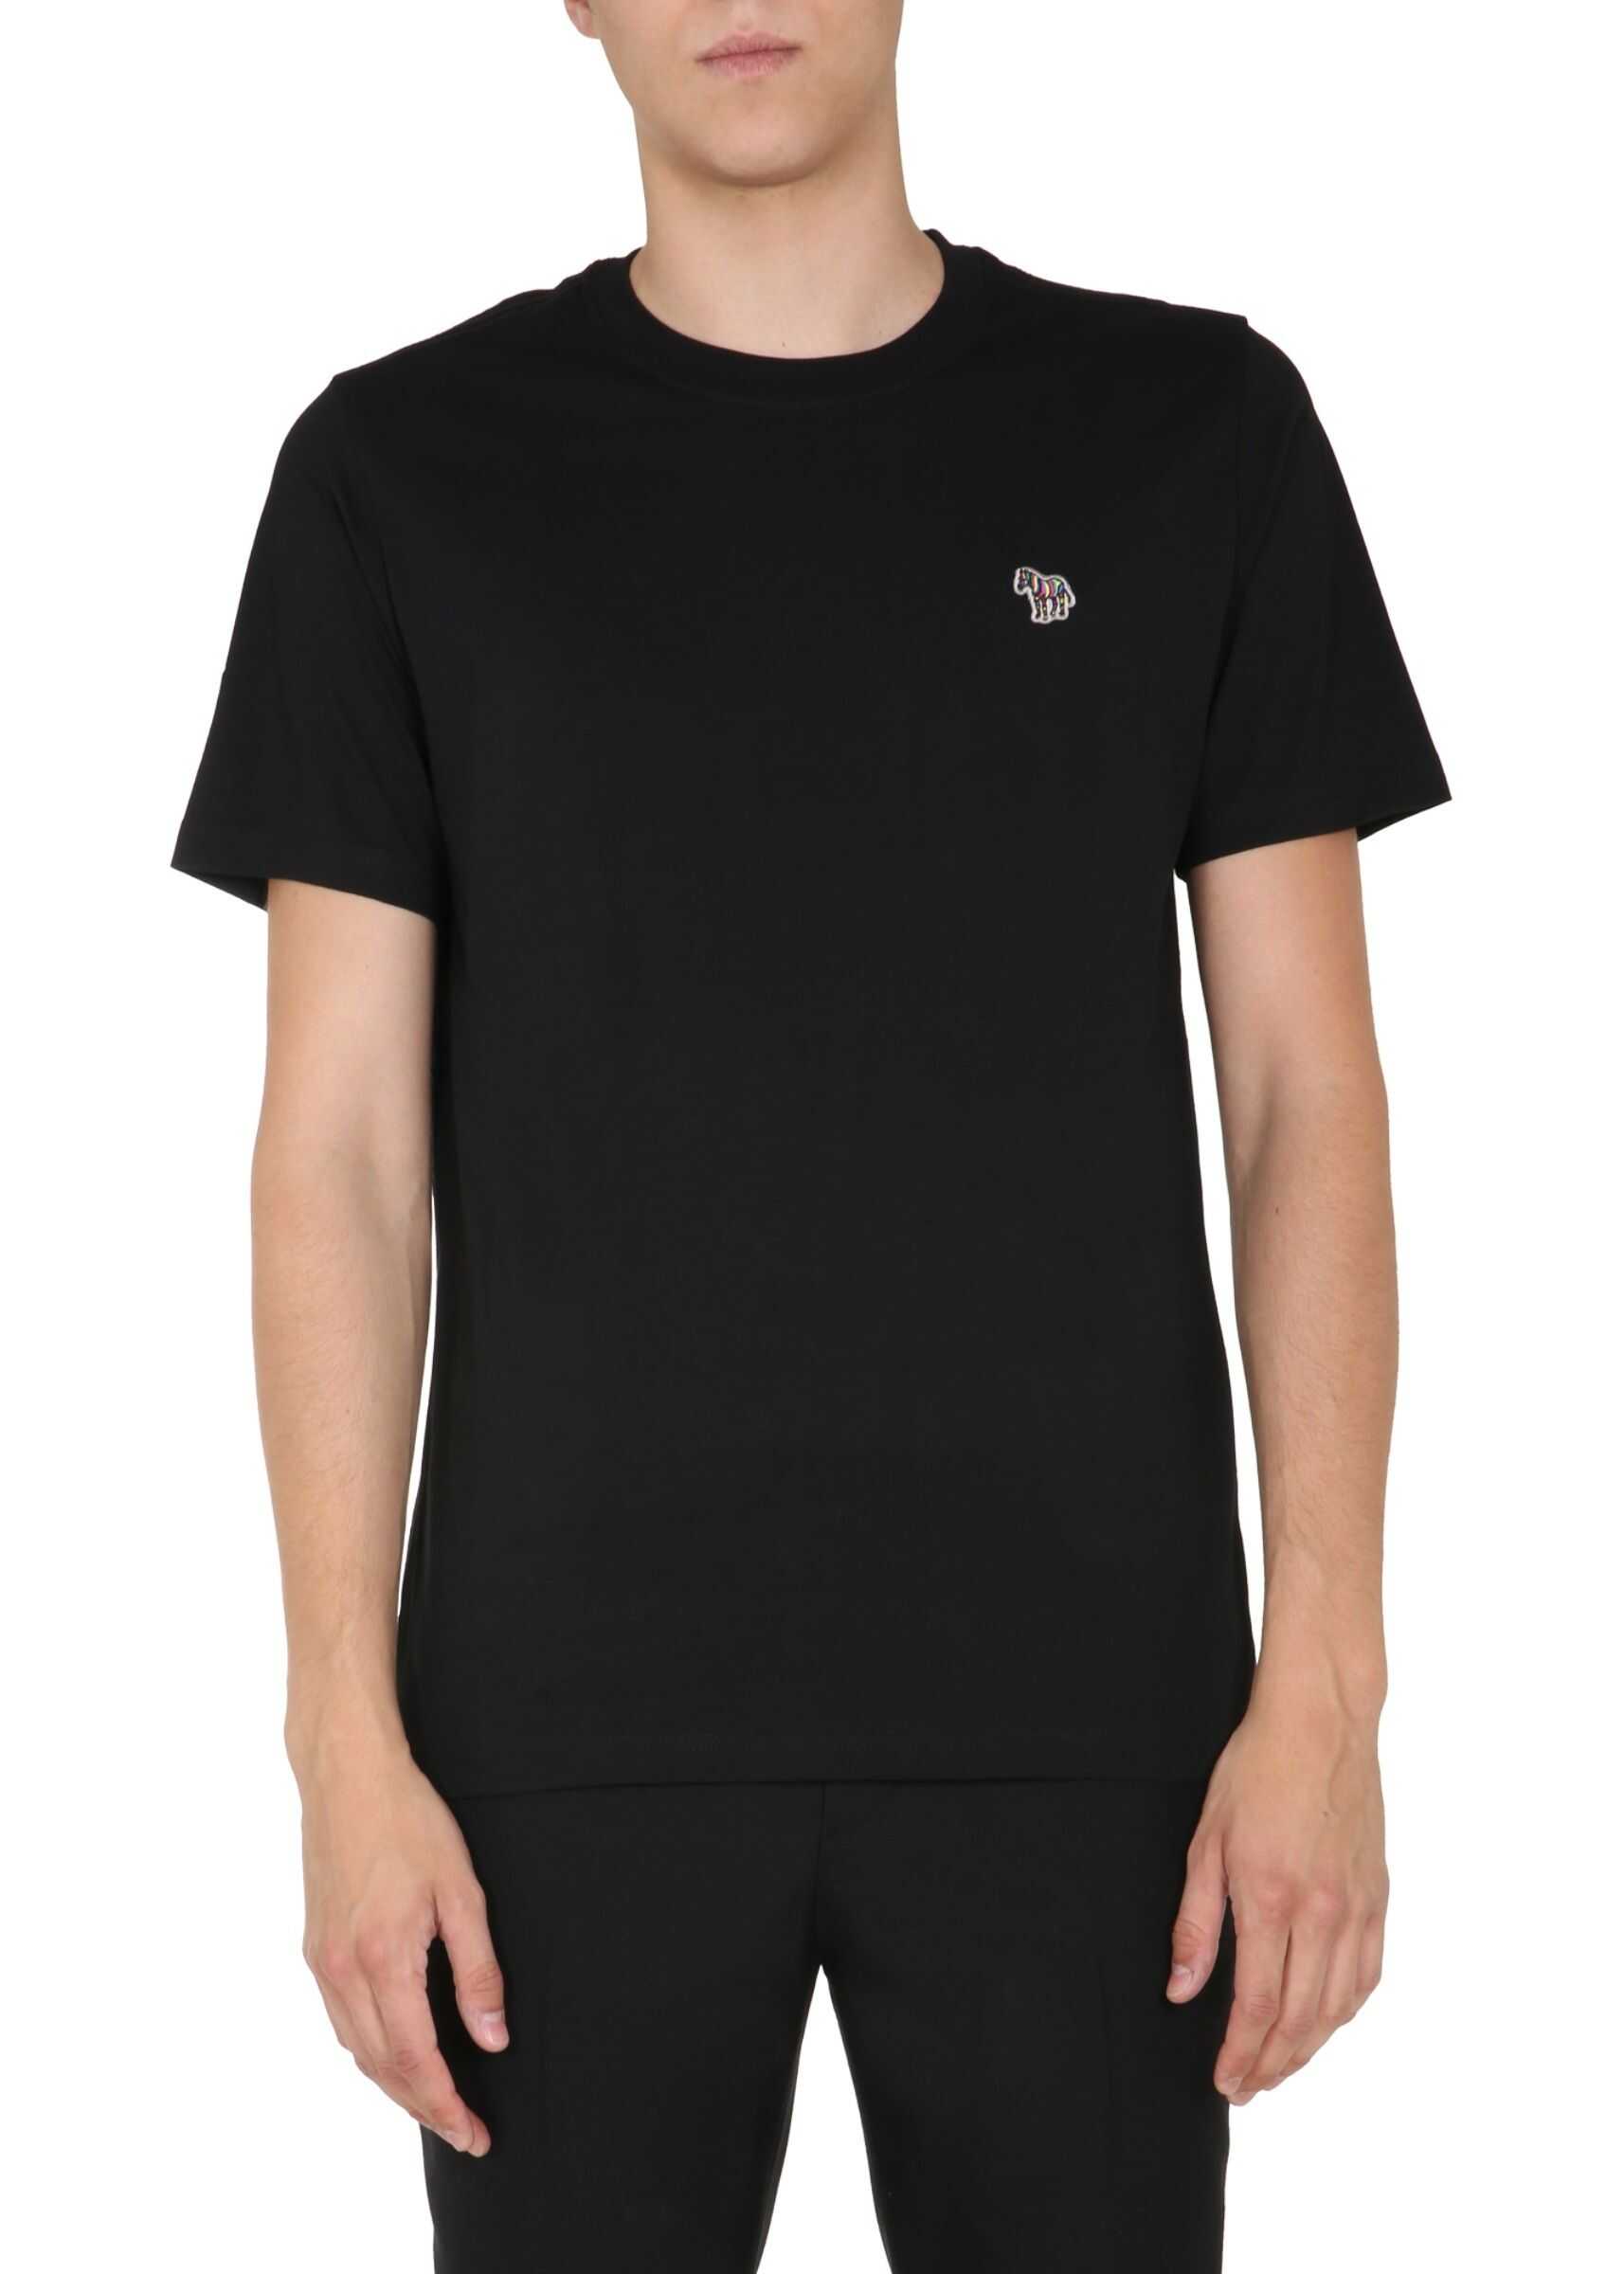 PS by Paul Smith Round Neck T-Shirt BLACK